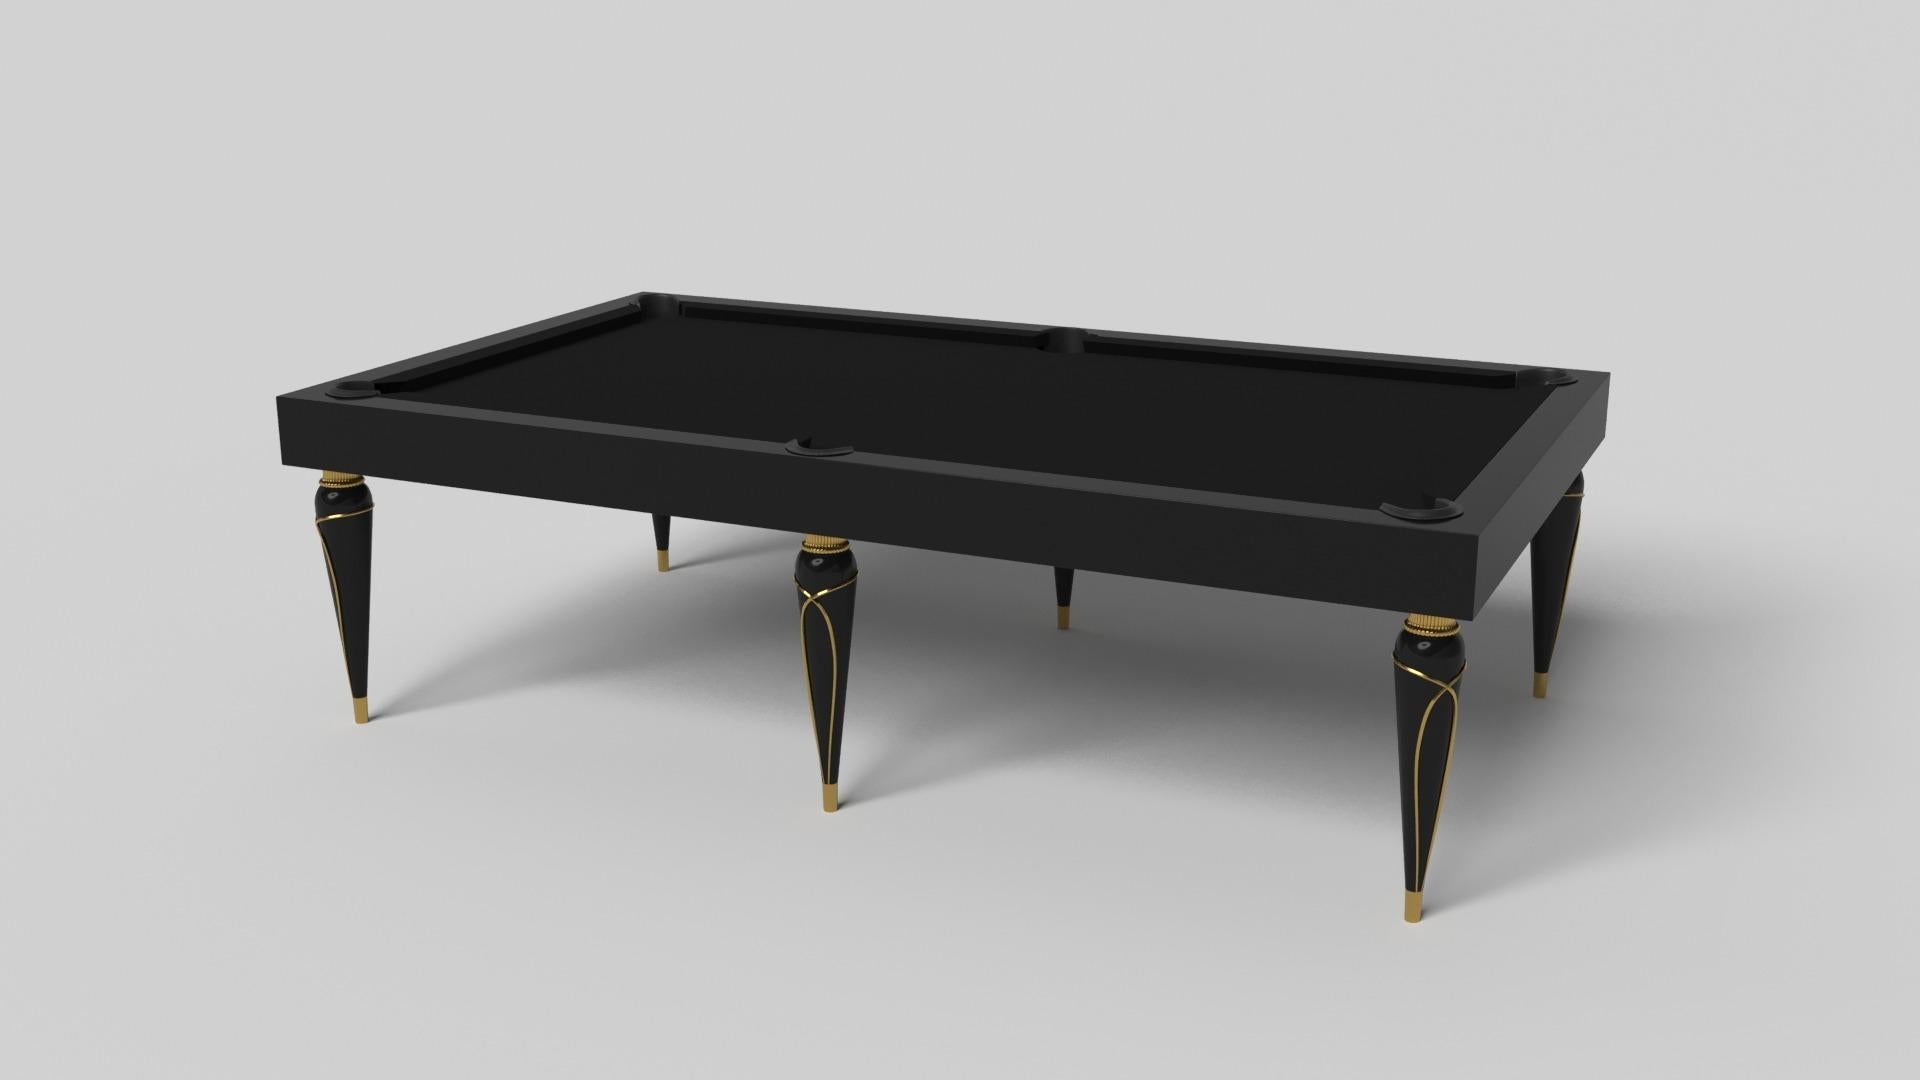 Champagne gold accents add undeniable elegance to this luxury pool table. Offering superior playability and uncompromised style, this design features hand carved details, decorative metal elements, and metal sabots at the bottom of each leg. The